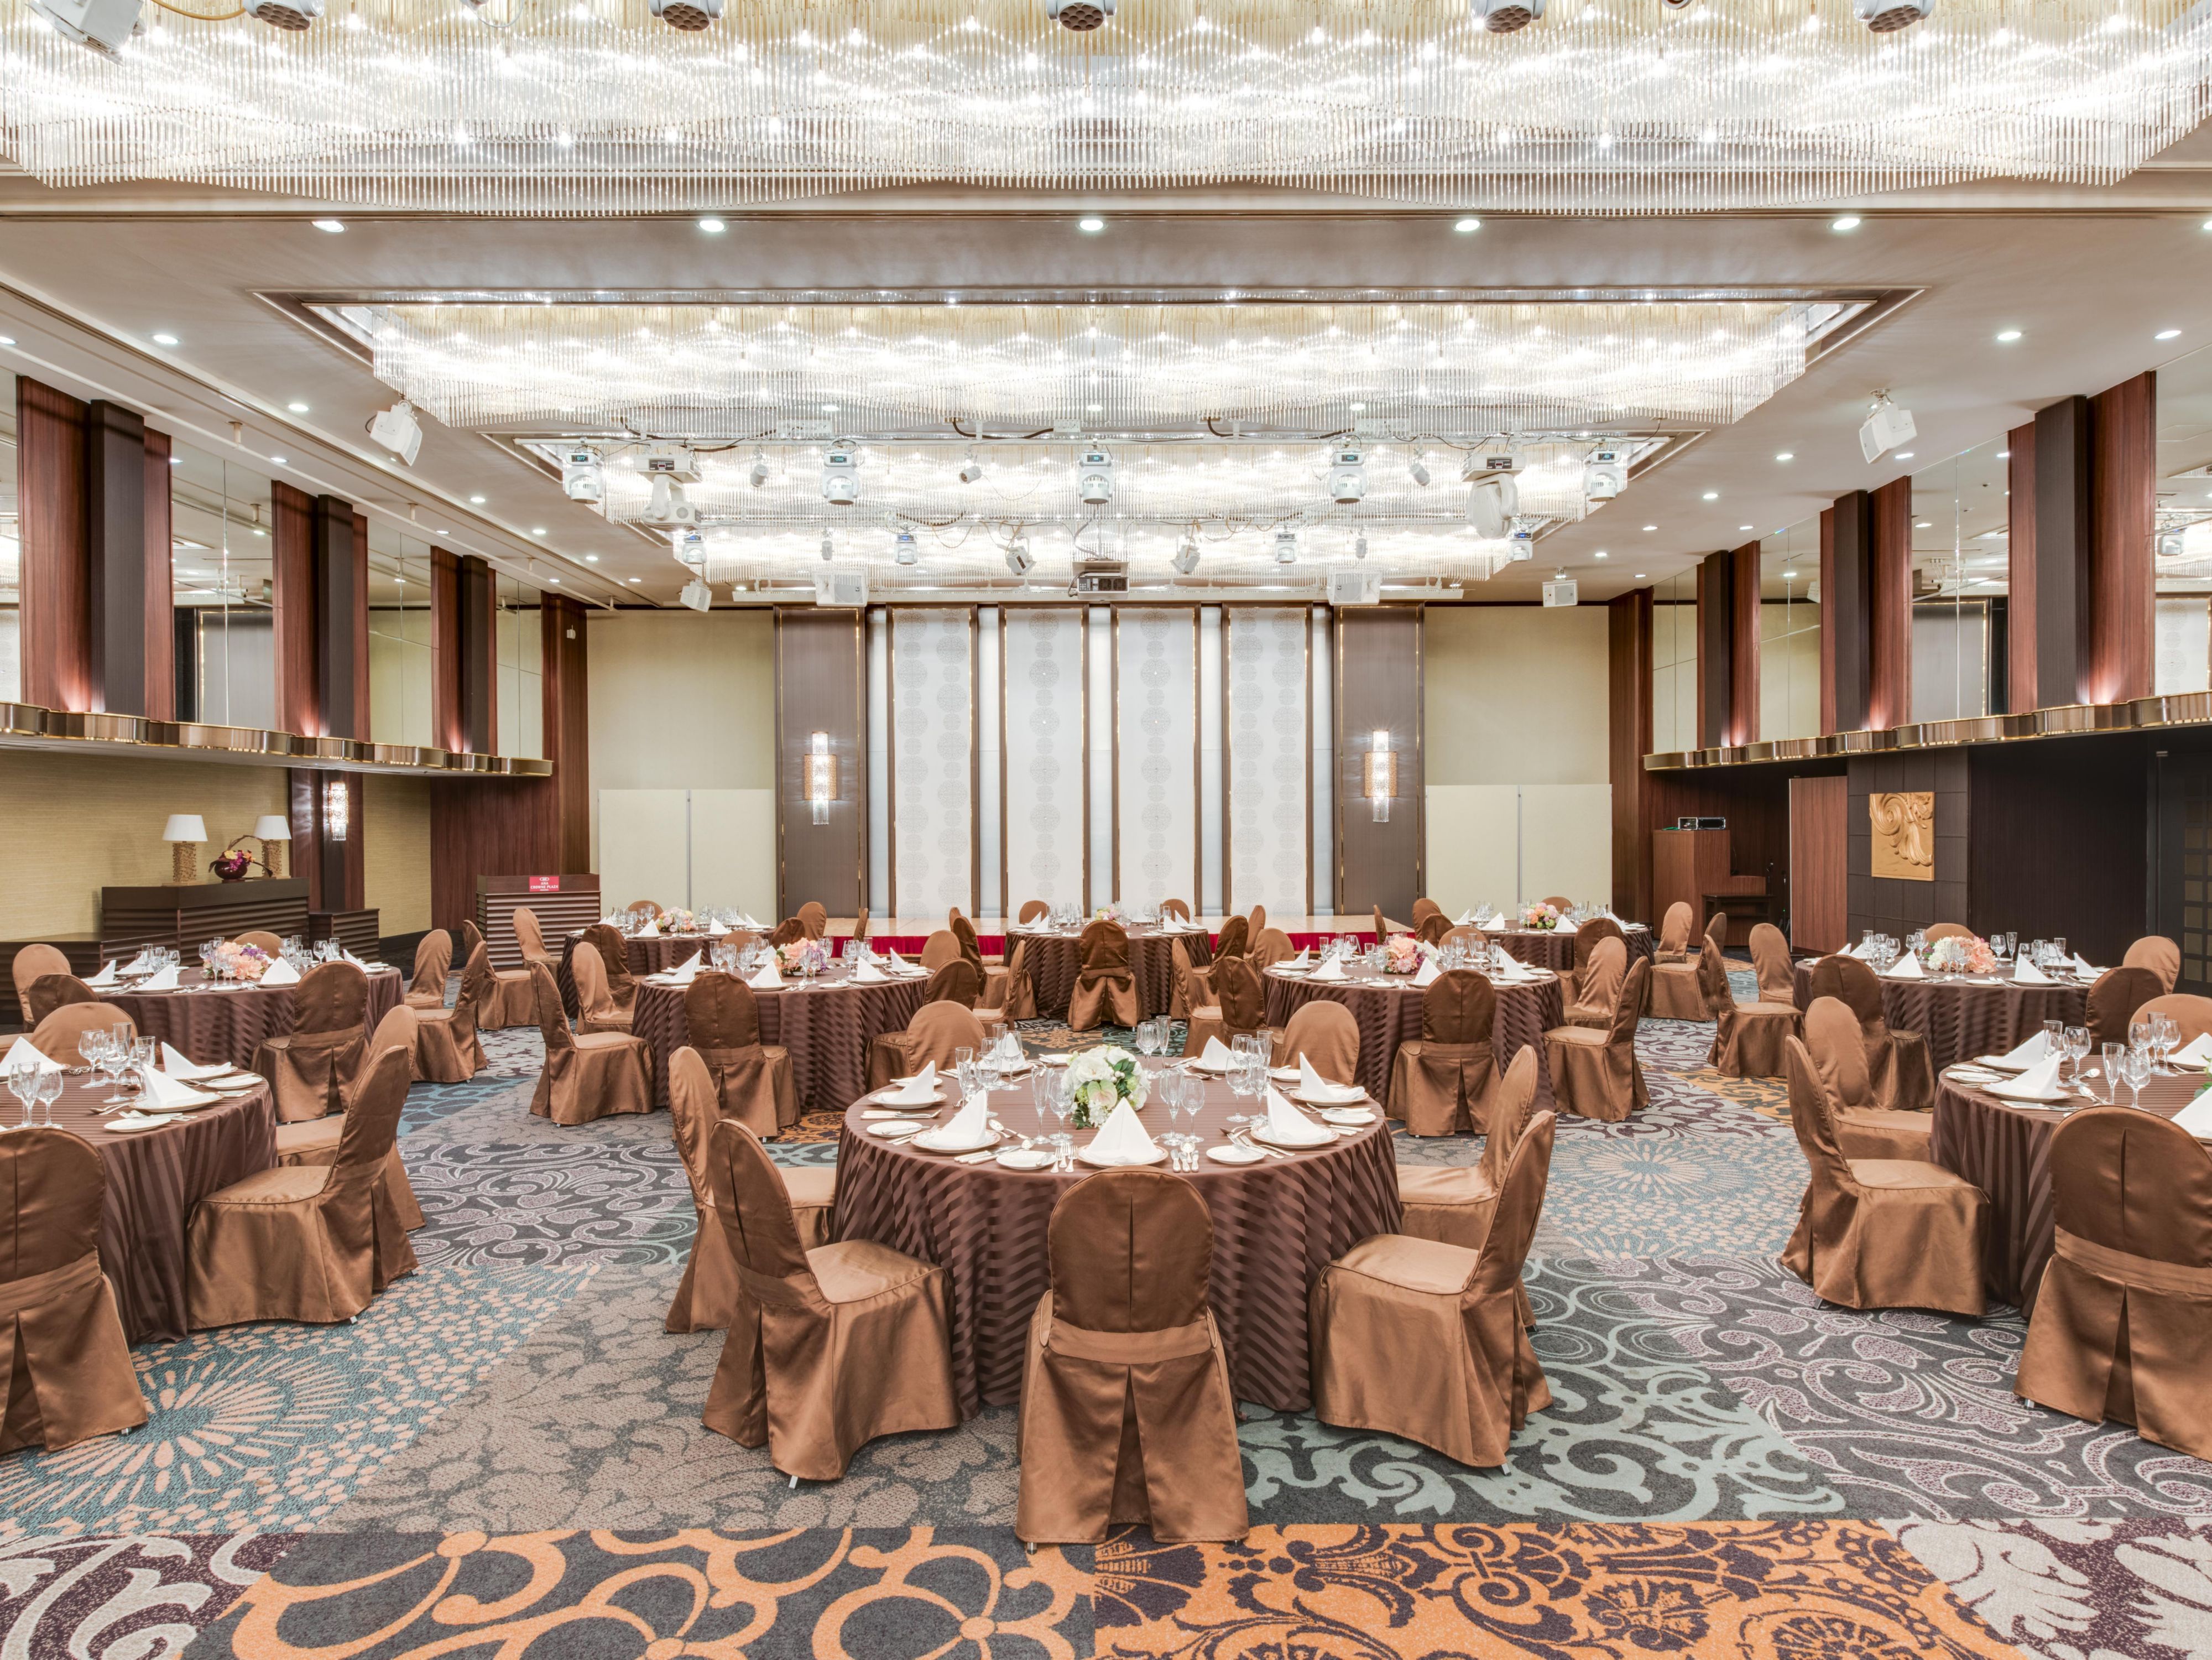 Host your next meeting, exhibition or event in one of our seven, impressive banquet rooms. Our Crown Event Director looks forward to helping you plan the perfect event from the moment you contact us to ensure that everything runs smoothly and that your guests remember your event long after it has ended.